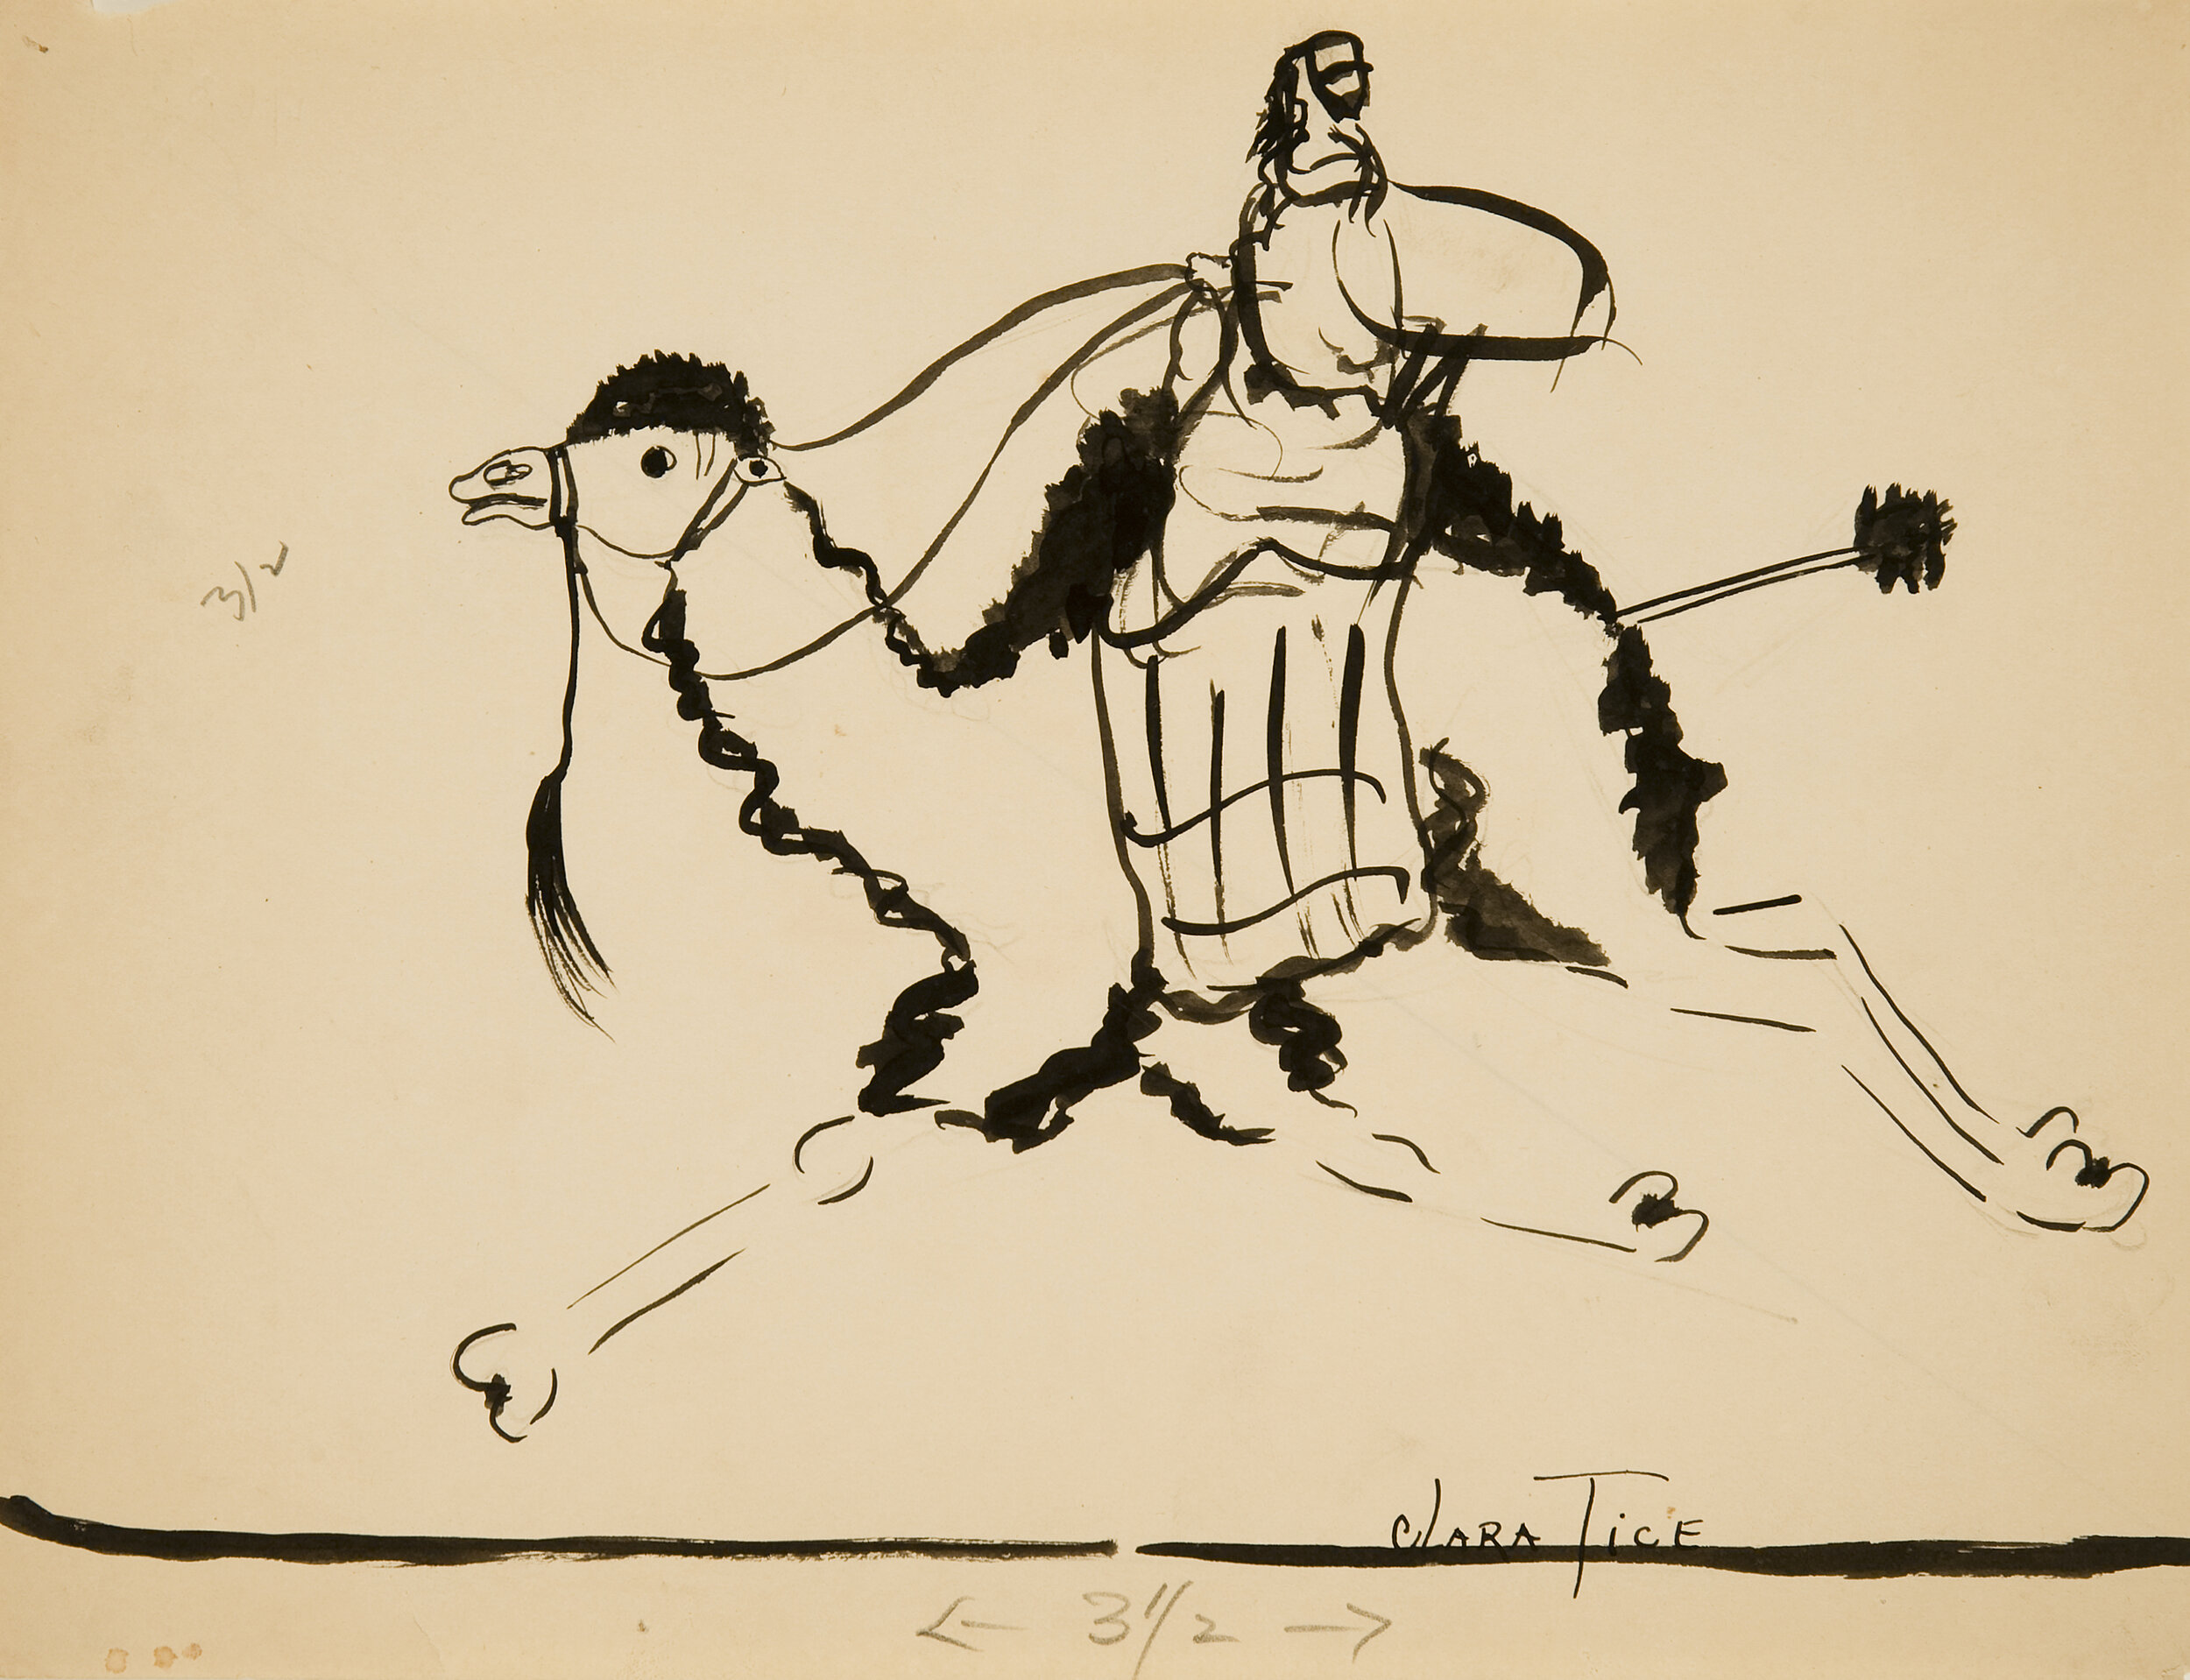 Black ink drawing of a person riding a galloping camel